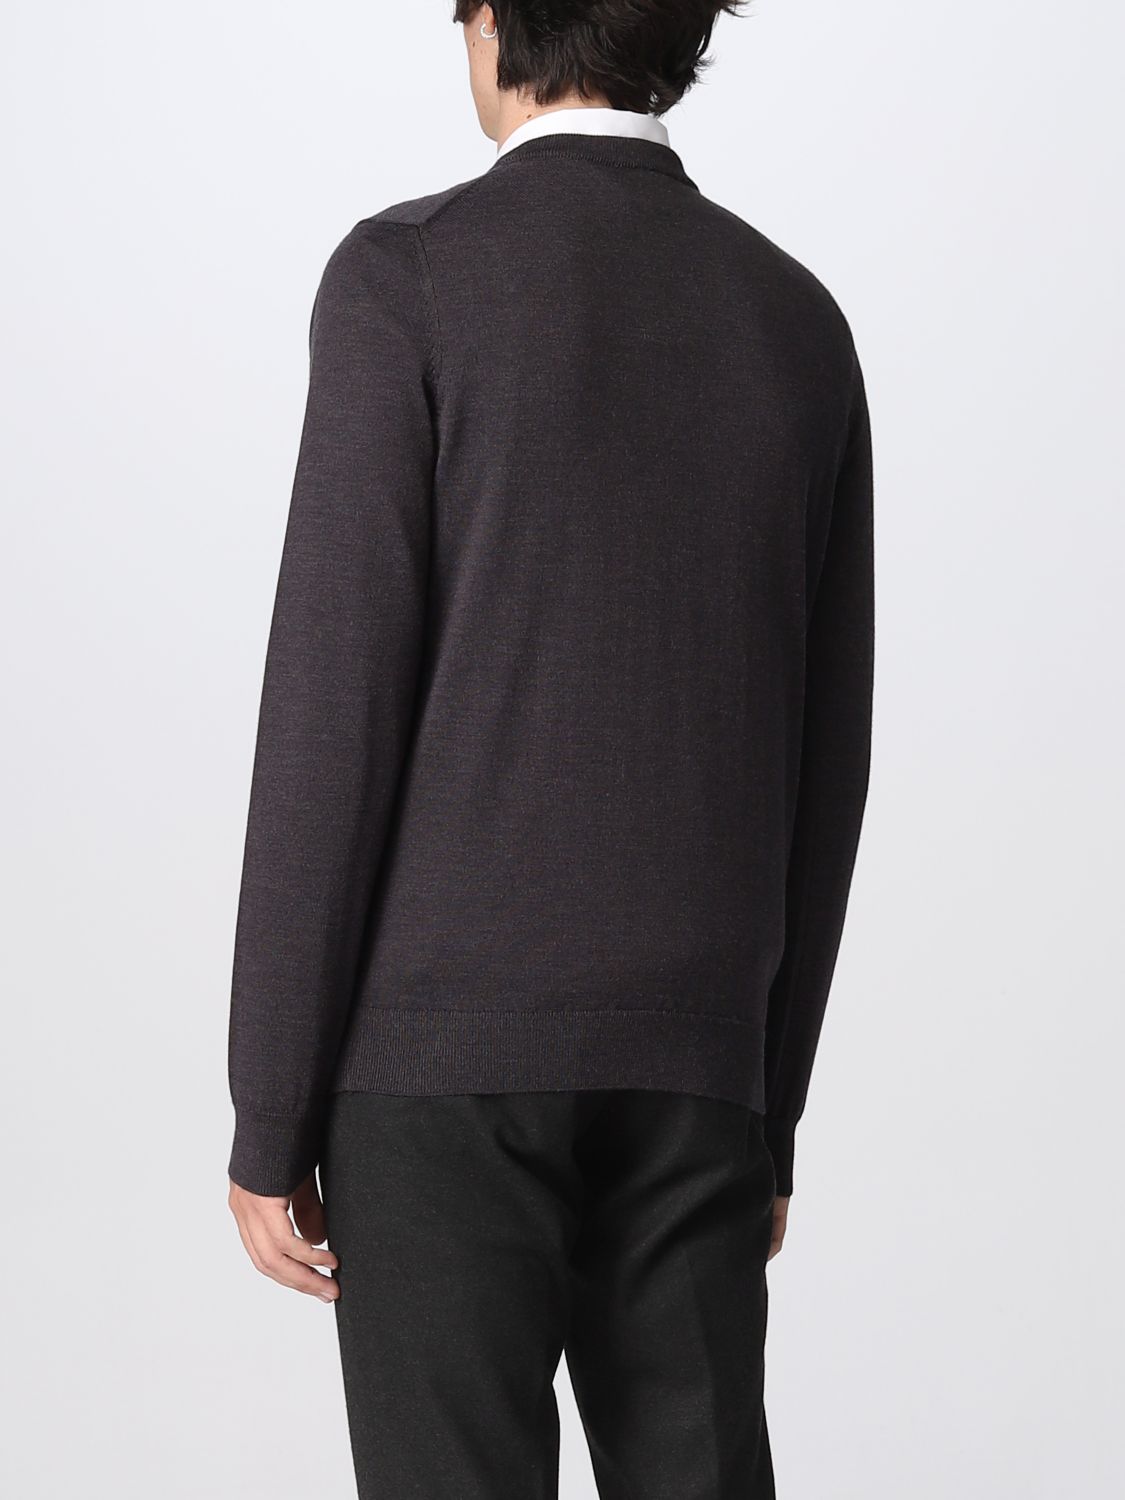 LACOSTE: sweater for man - Grey | Lacoste sweater AH1990 online on ...